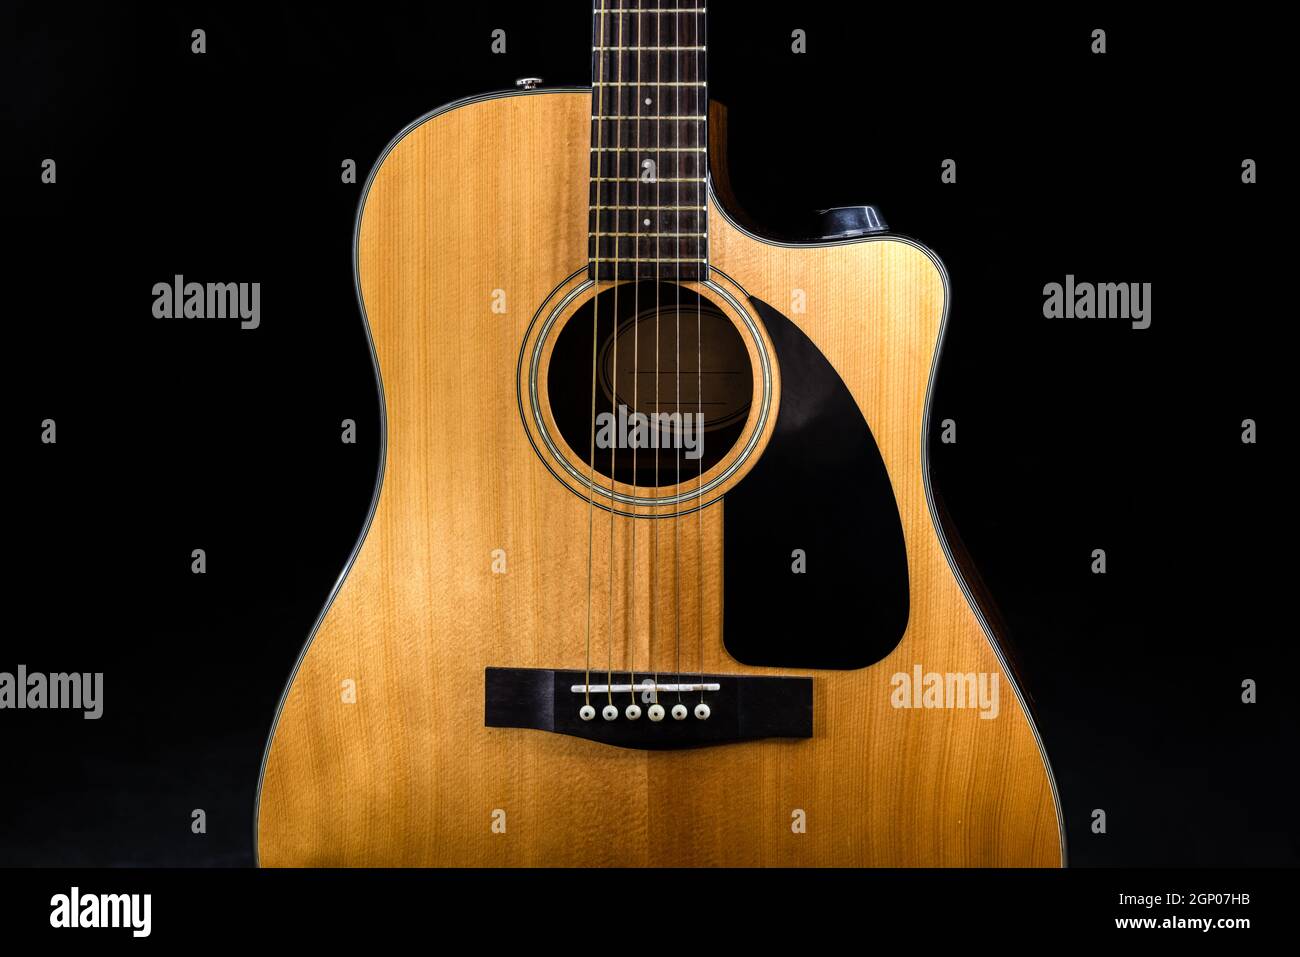 body of a classic acoustic six-string guitar with a yellow sound board and black pickguard on isolated black background Stock Photo